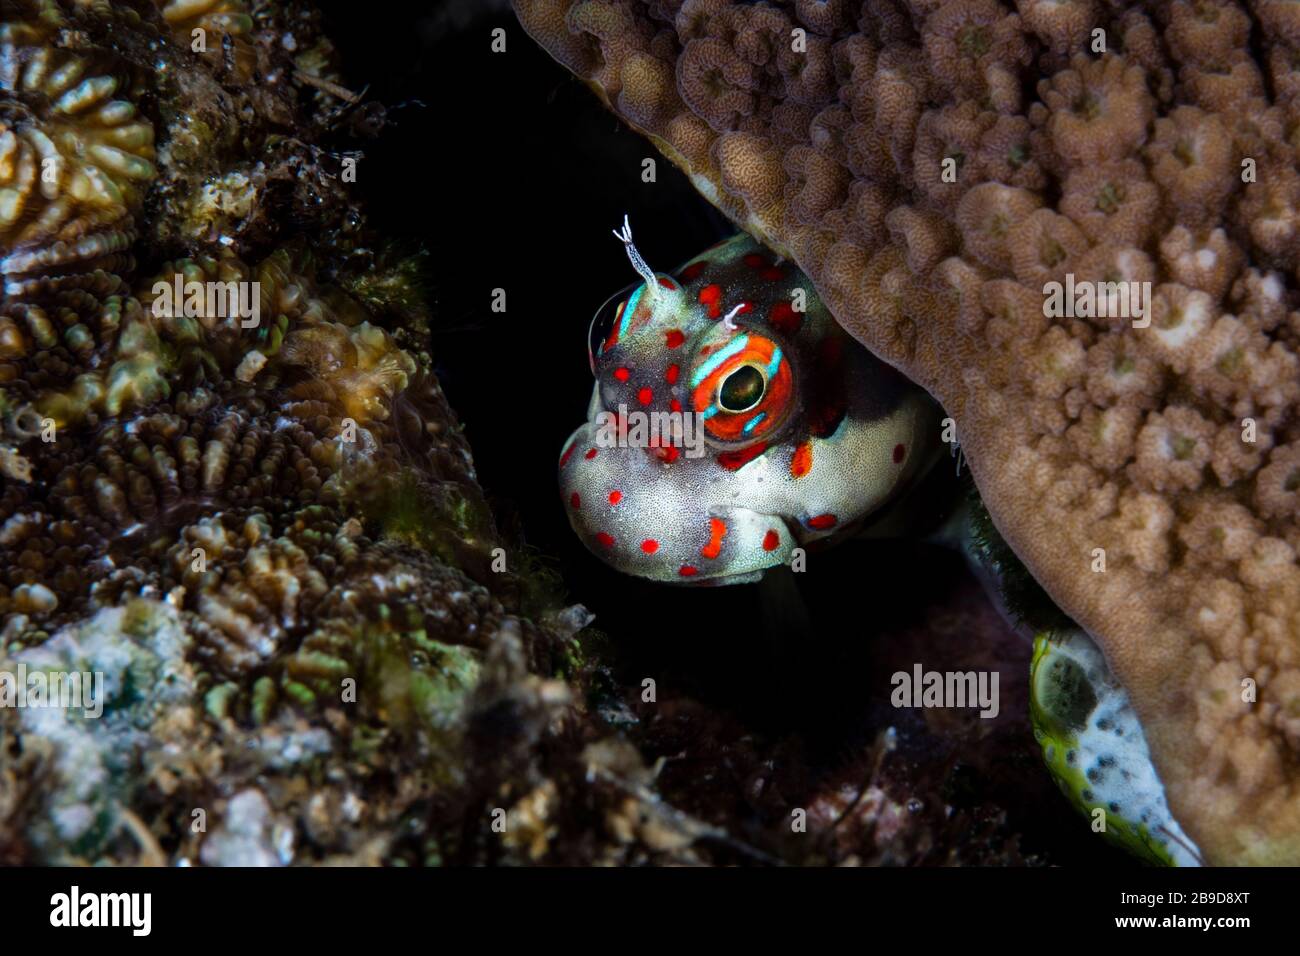 A cute red-spotted blenny, Blenniella chrysospilos, looks out from its protective home. Stock Photo